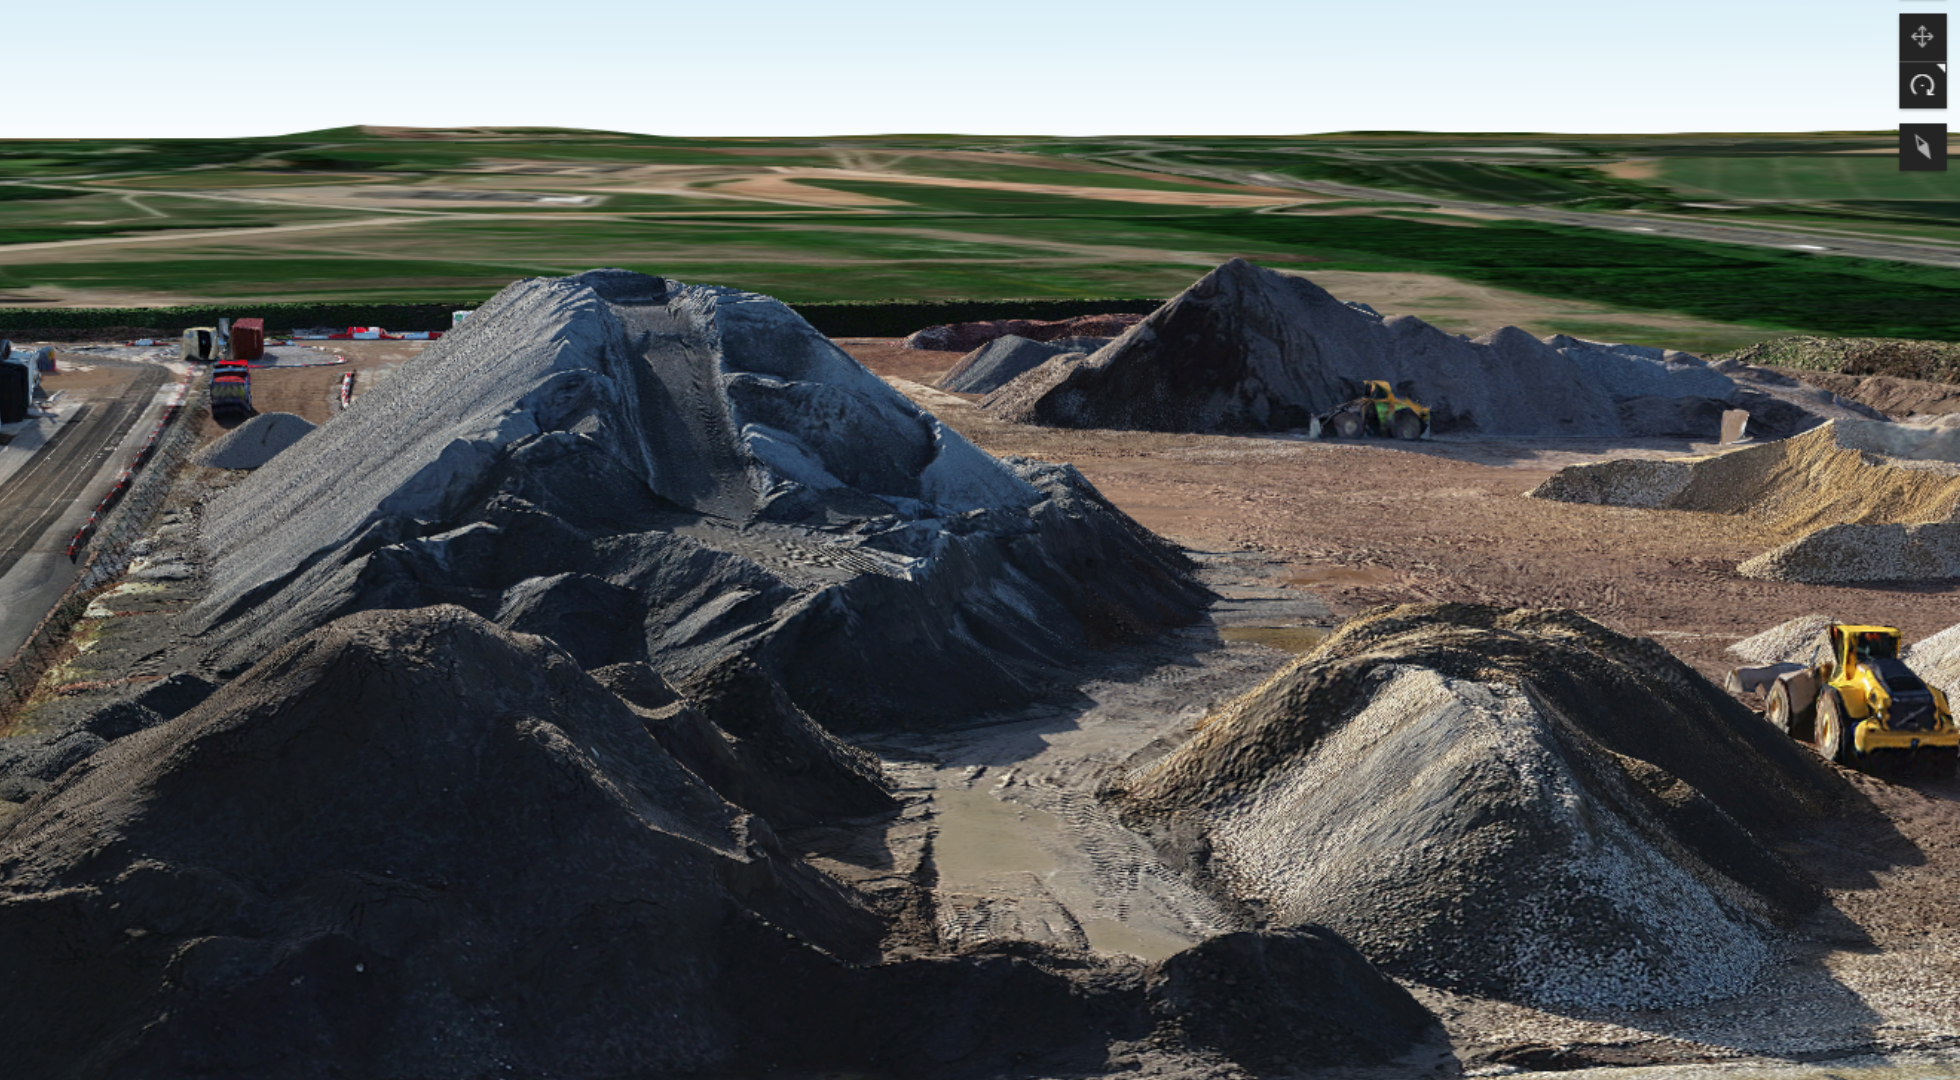 Using drones improves the safety of measuring stockpiles and earth movements.